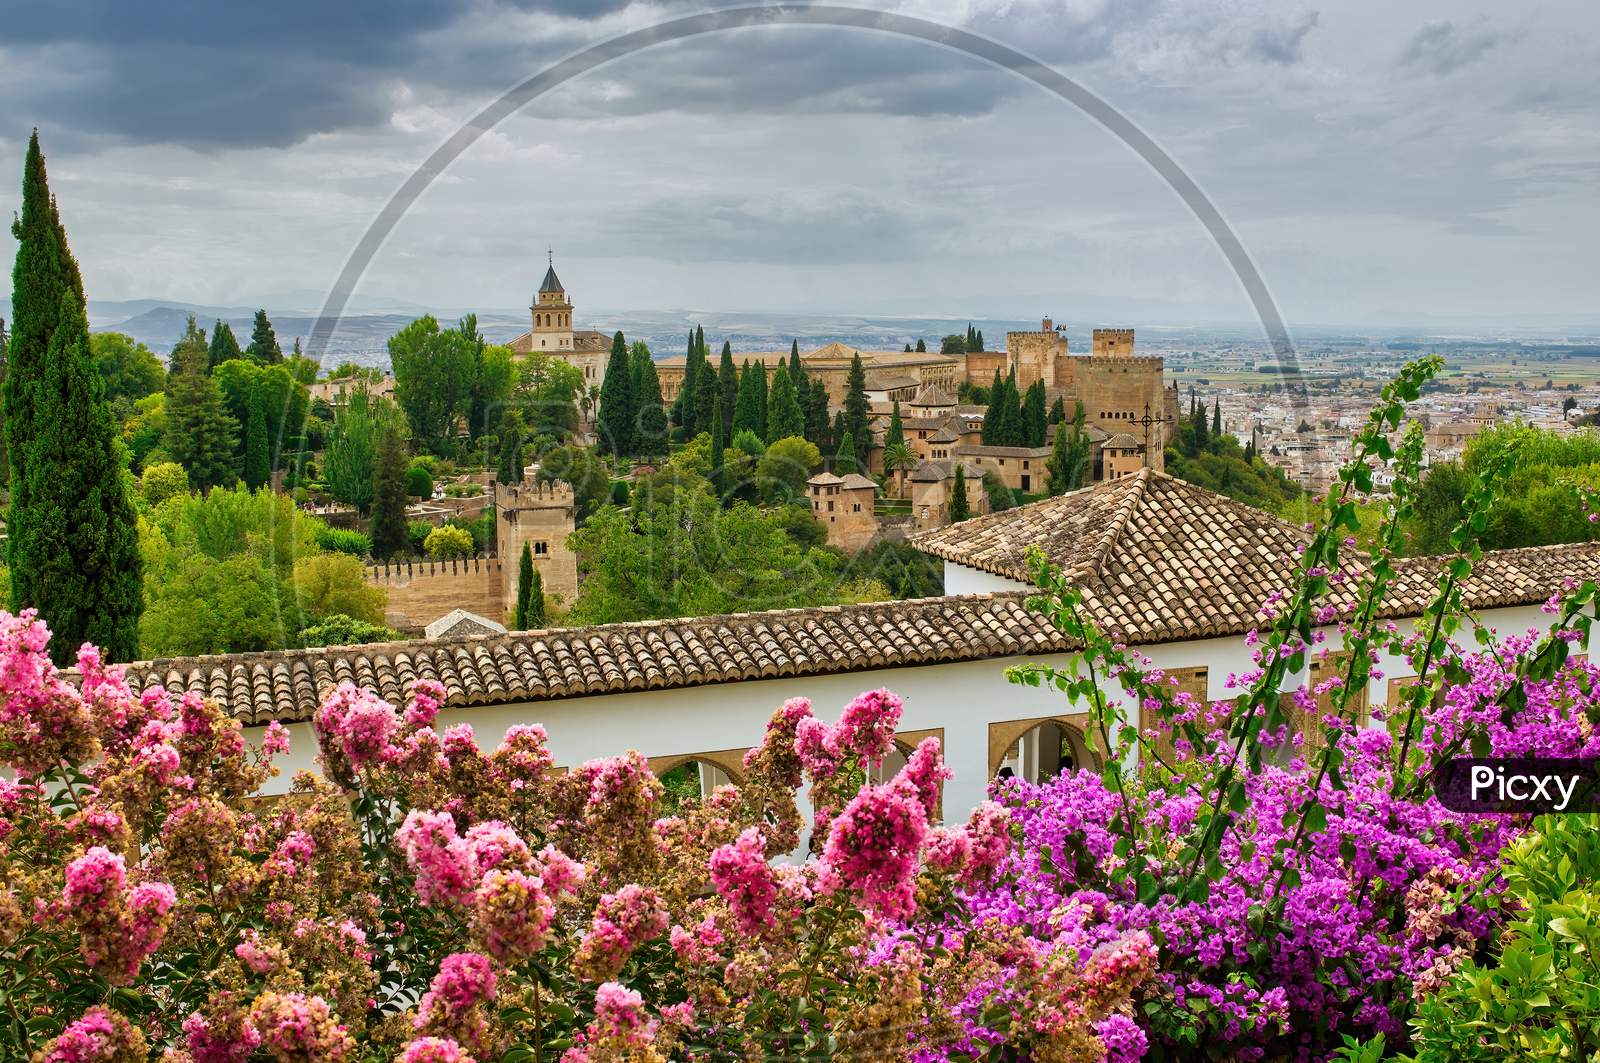 Granada, Spain - September 05, 2015: Wide Angle View Of Granada Miradors Architecture Located In Spain, Andalusia